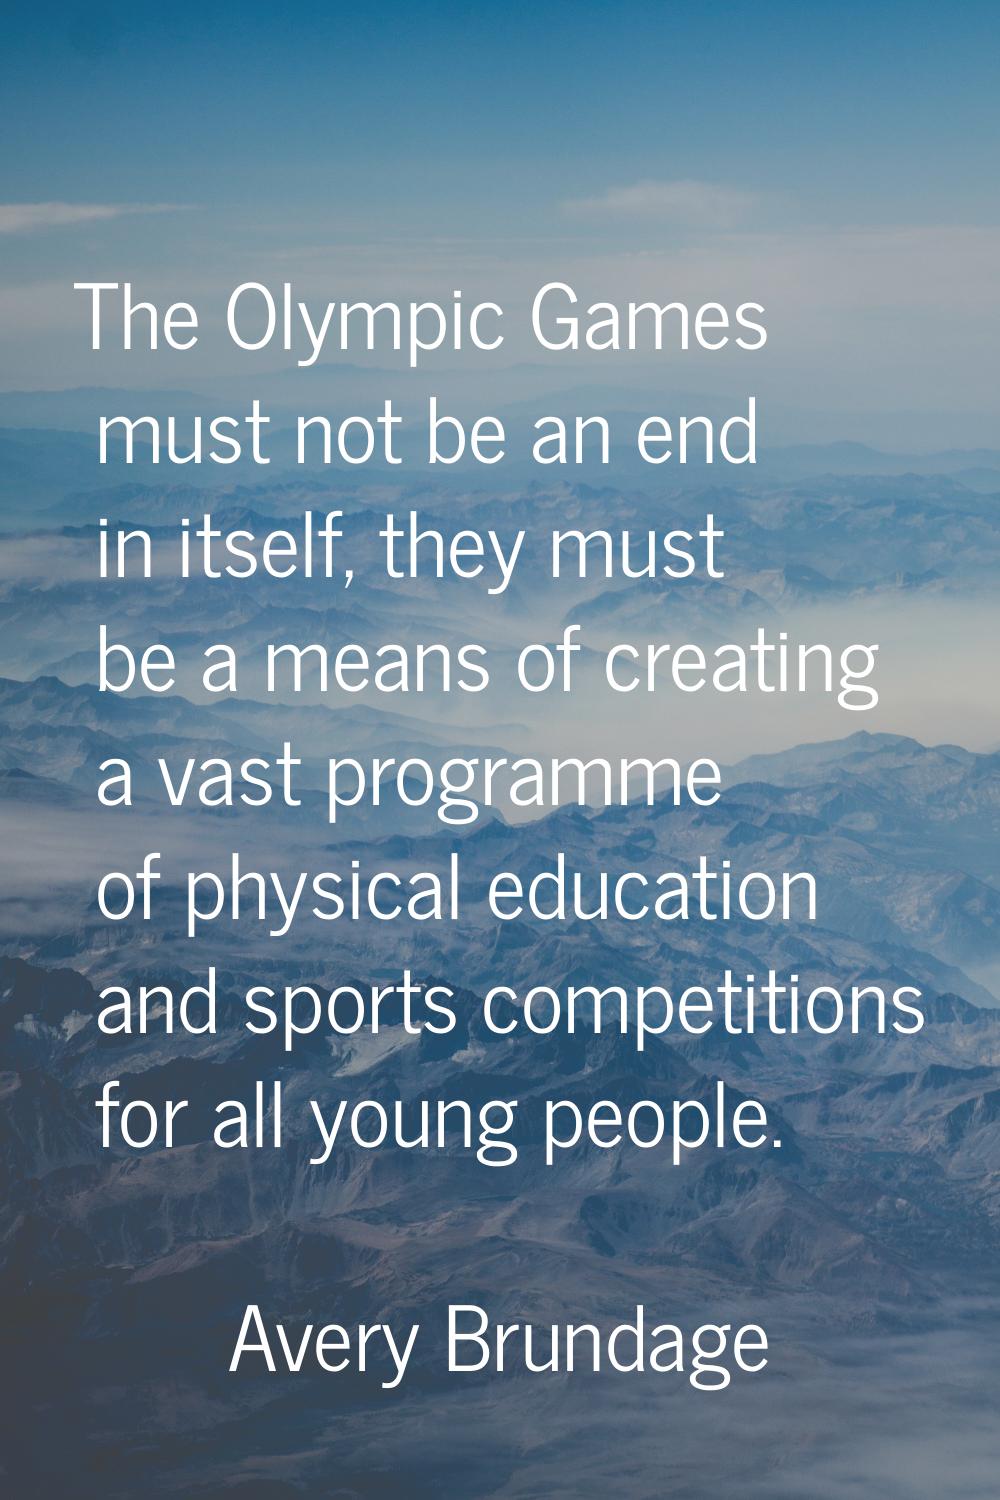 The Olympic Games must not be an end in itself, they must be a means of creating a vast programme o